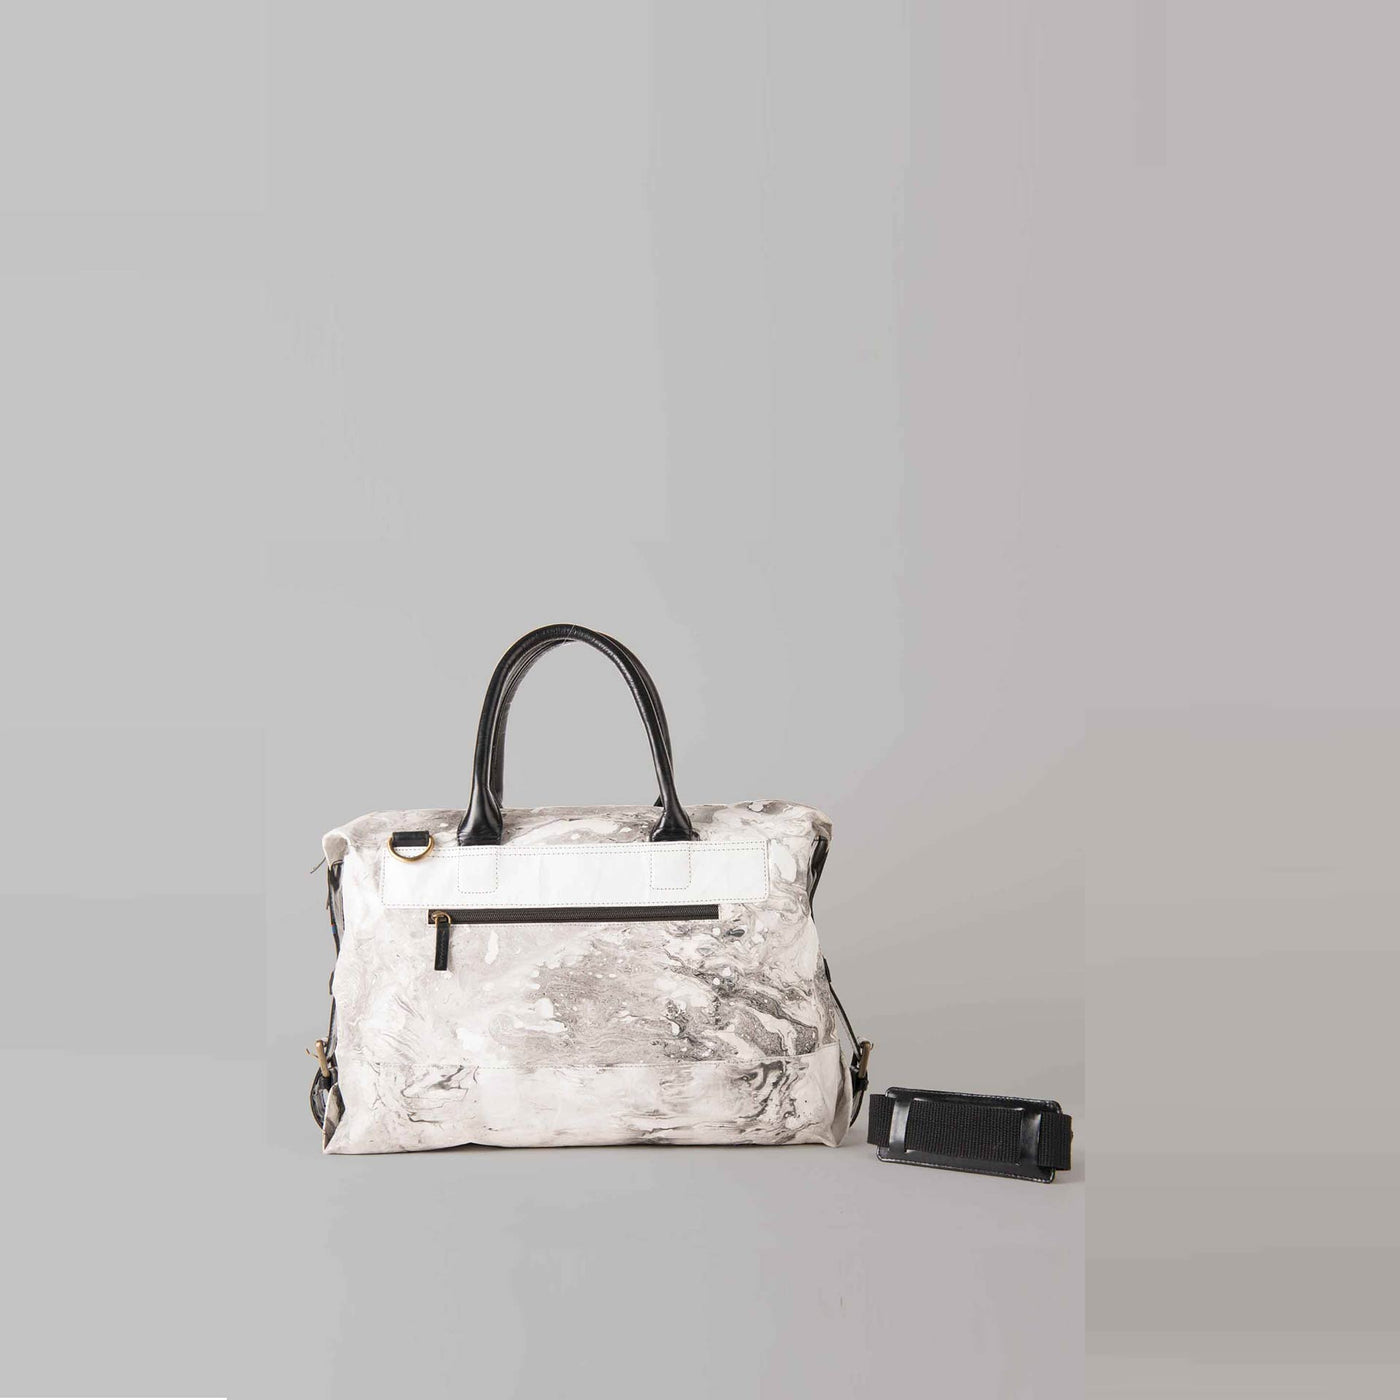 white and black duffle bag which is handcrafted in hybrid material faux leather